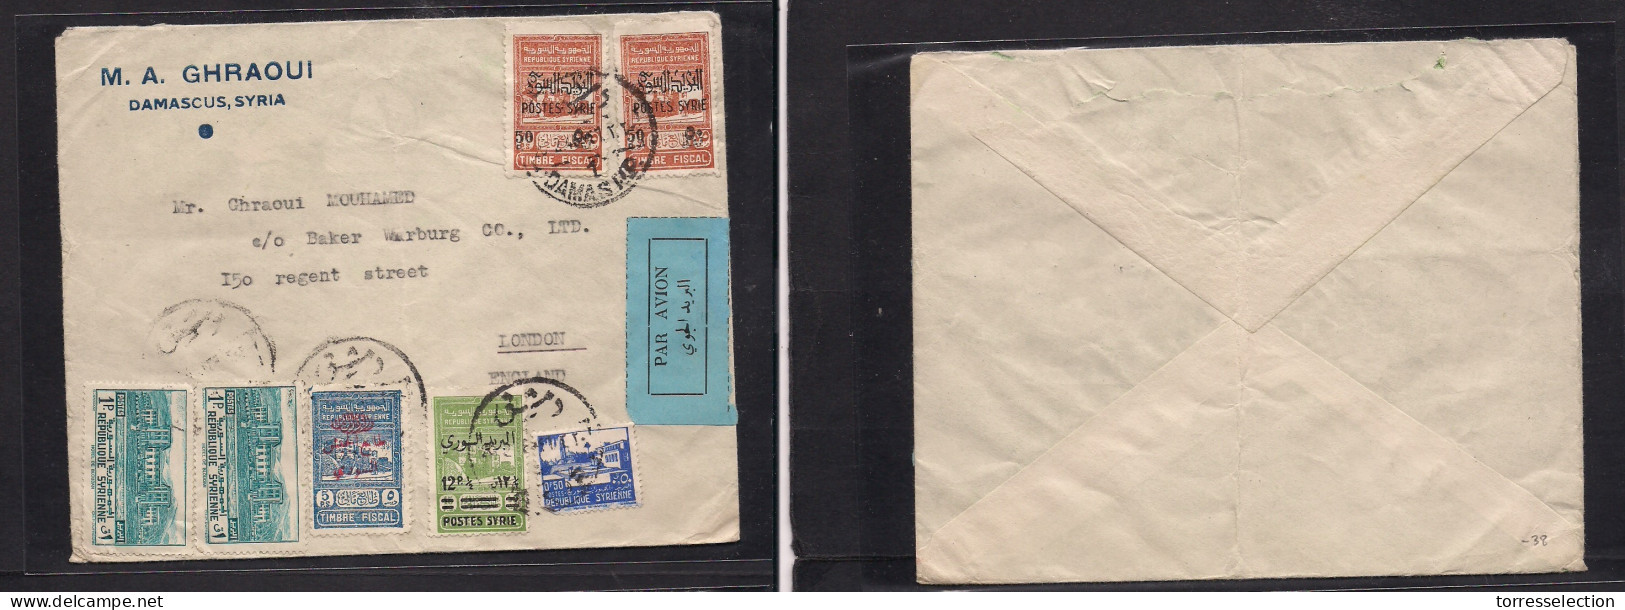 SYRIA. 1946 (26 Febr) Damas - London, UK. Air Multifkd Incl Postal Fiscal Ovptd Issue On Mixed Usage, Tied Cds. Fine. - Siria